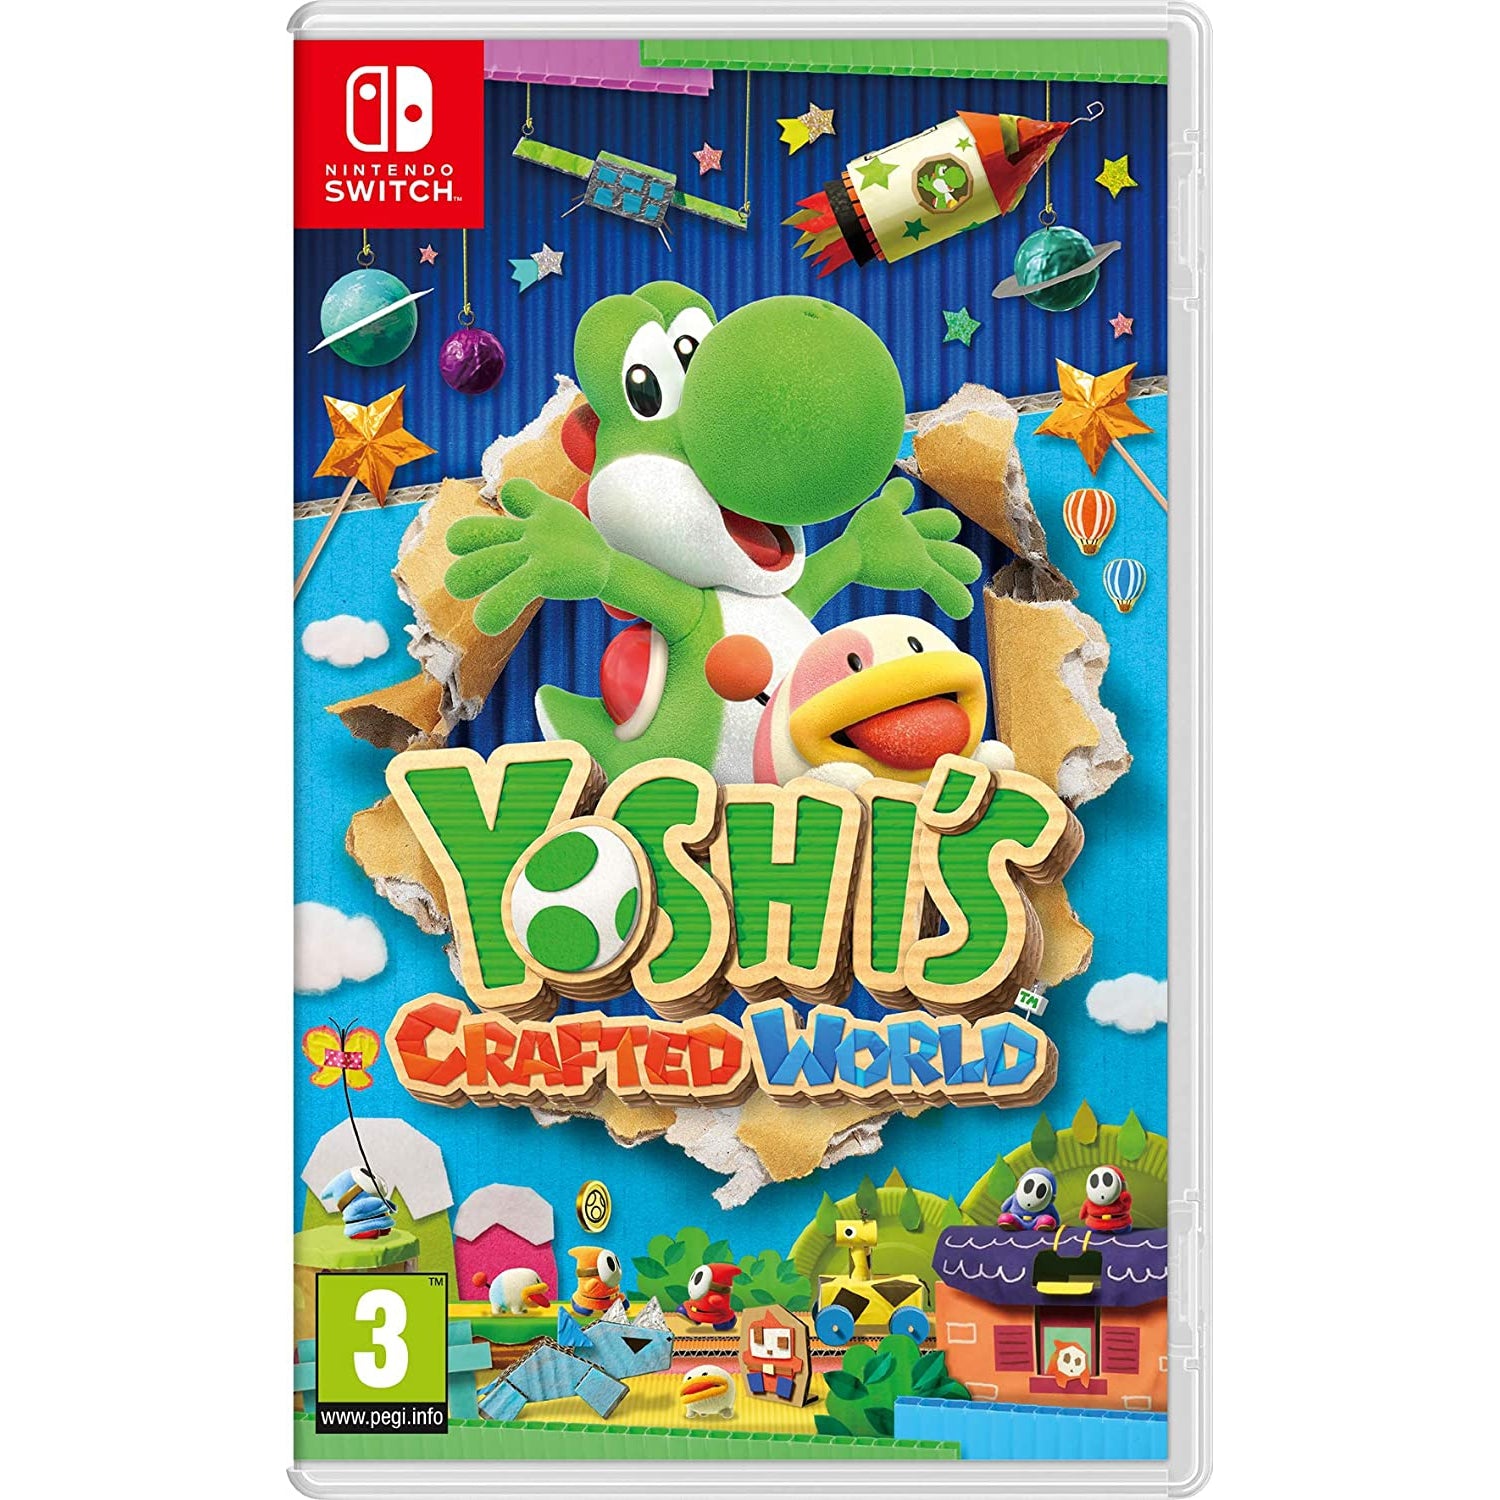 Yoshi's Crafted World (Nintendo Switch) Video Game